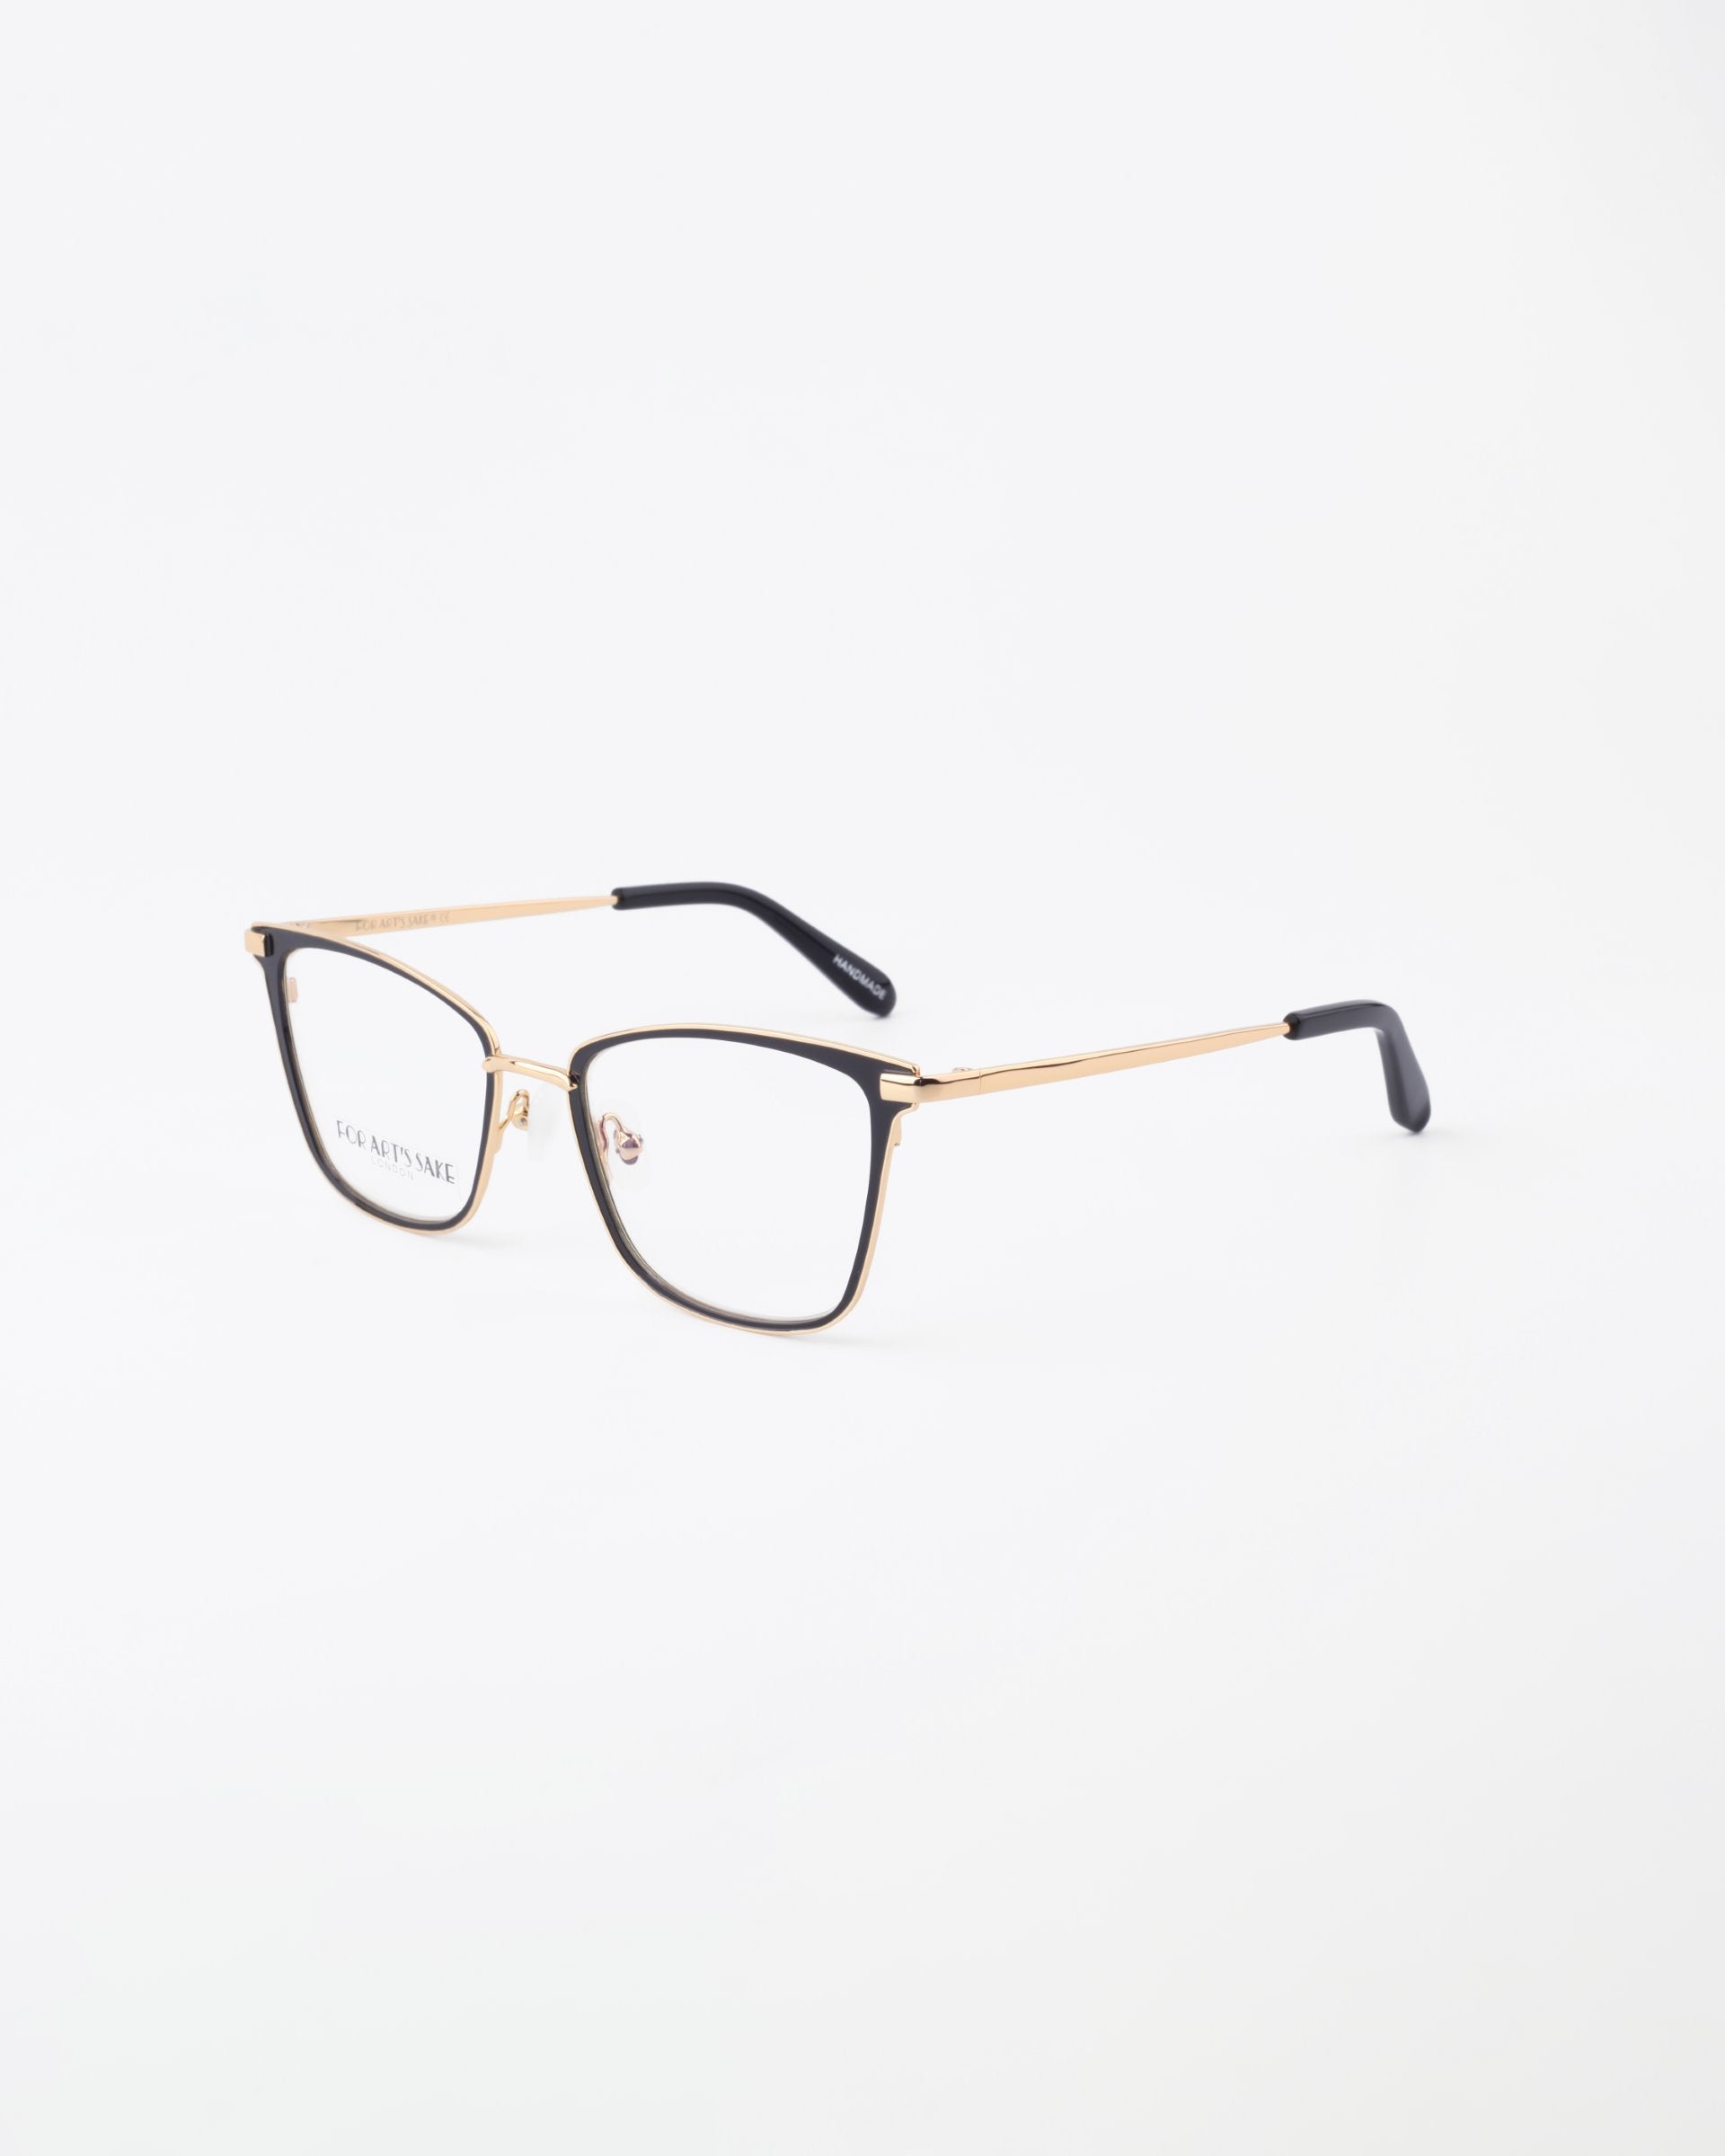 A pair of stylish For Art's Sake® Windsor eyeglasses with thin 18-karat gold-plated frames and black temple tips are set against a plain white background. The lenses, which feature a blue light filter, showcase the minimalist and elegant design of the eyewear.